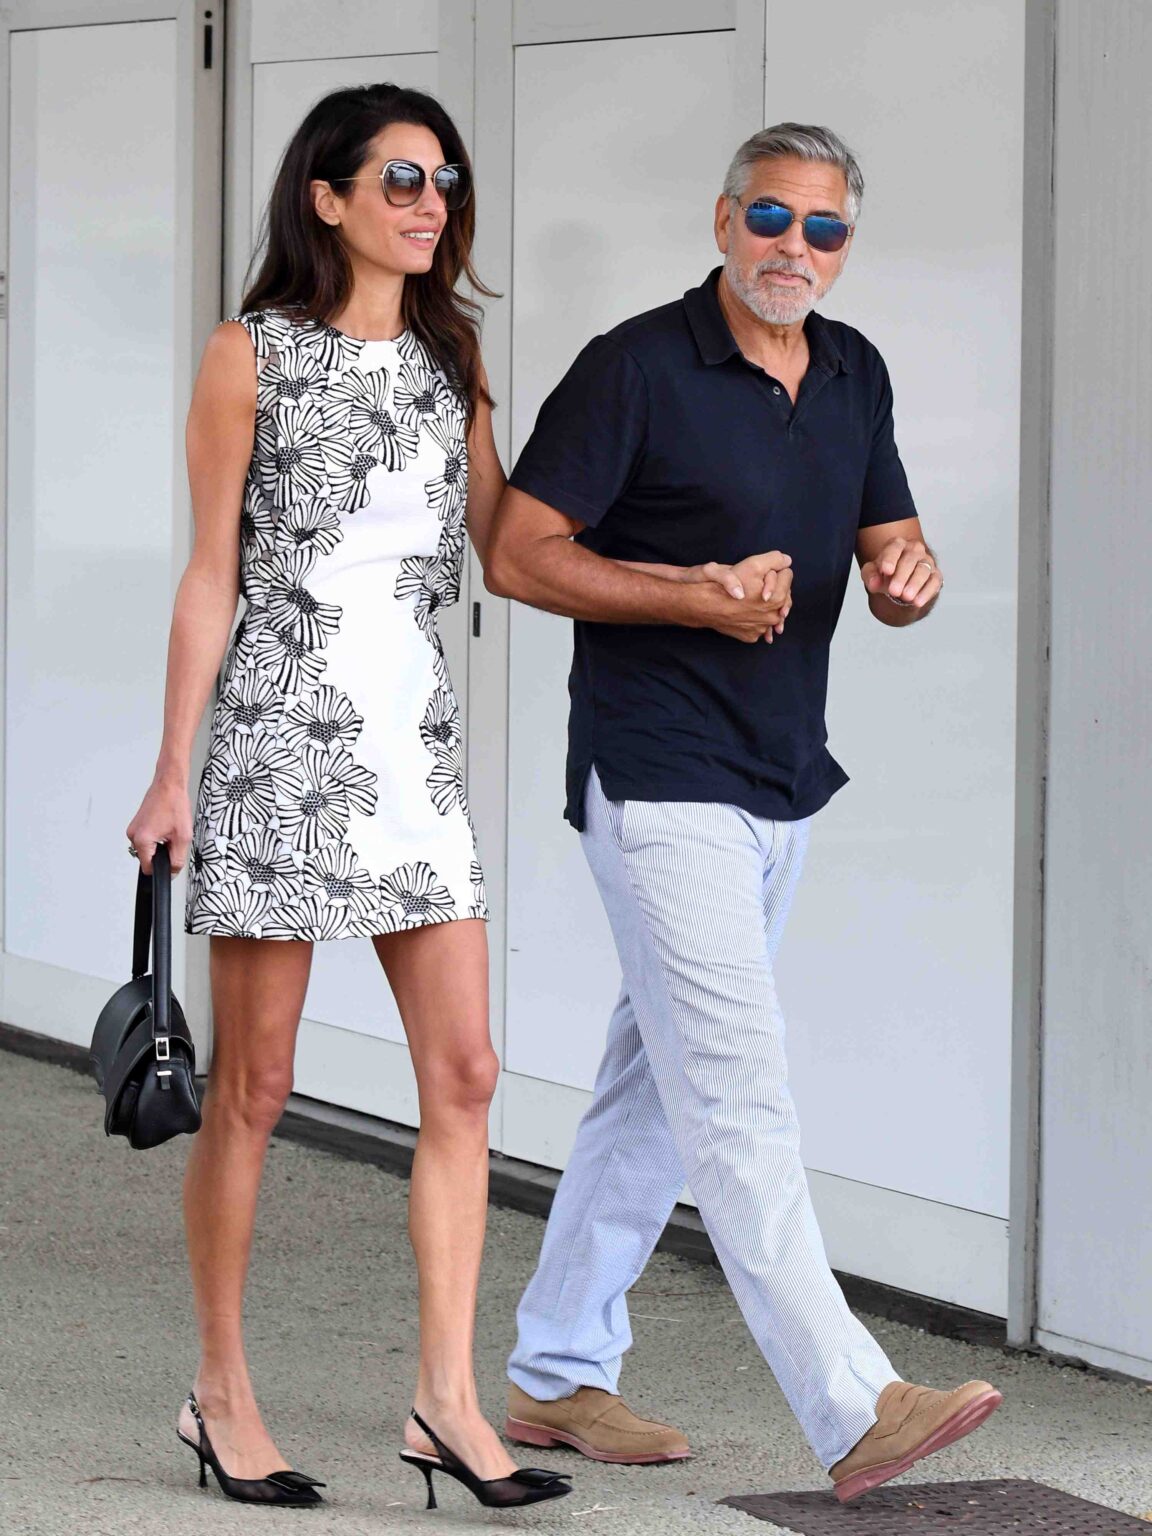 Unmask the "nude truth" about Amal Clooney in our titillating expose. Is a secret divorce from George Clooney imminent? Get the scoop on the sexy secret tearing Hollywood apart.